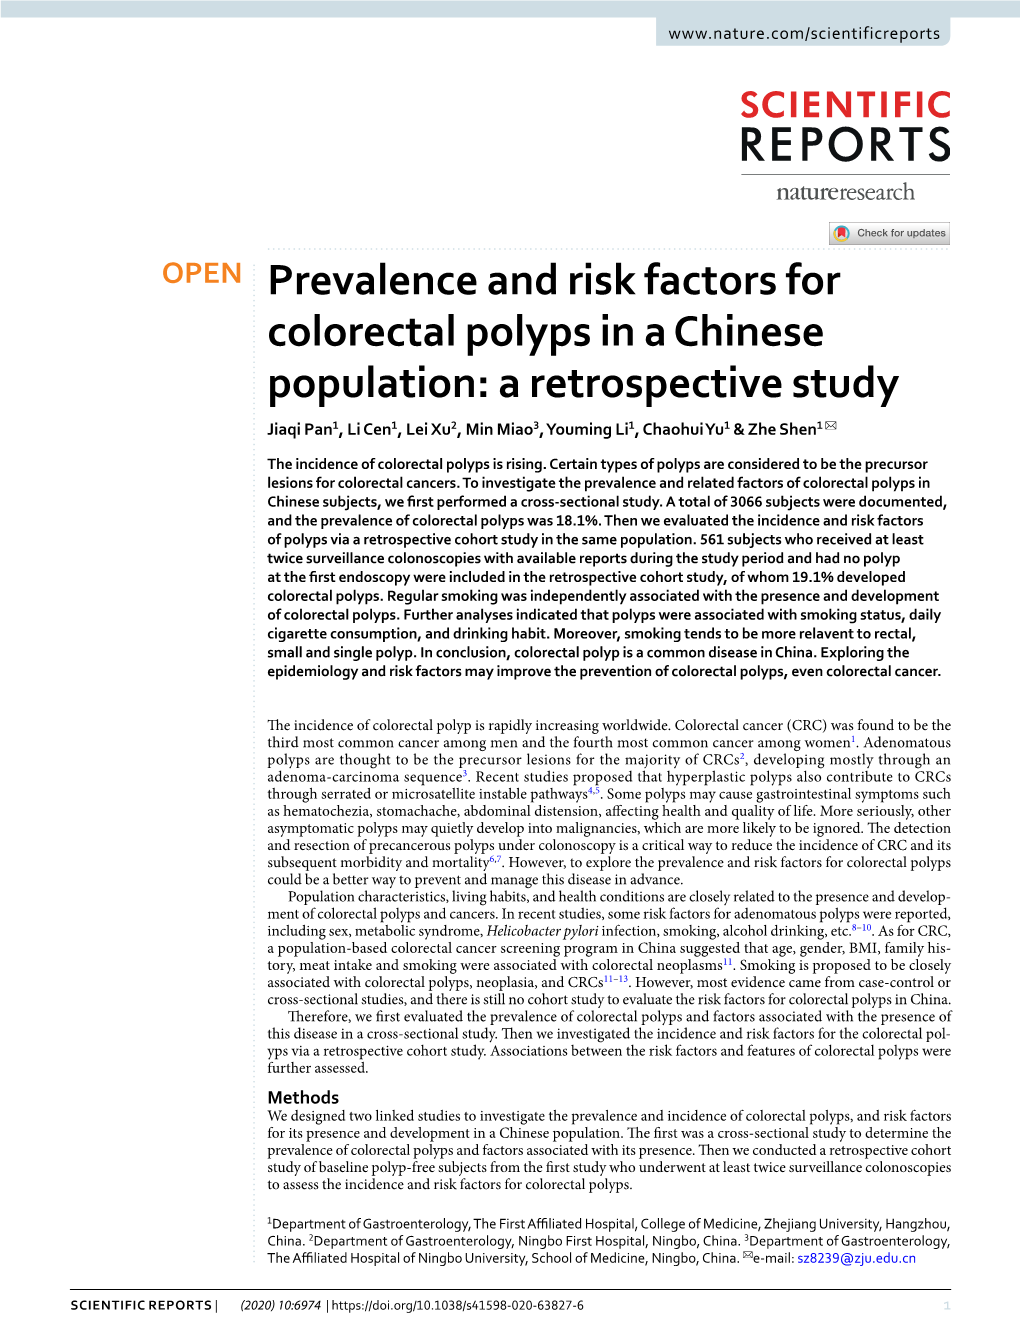 Prevalence and Risk Factors for Colorectal Polyps in A